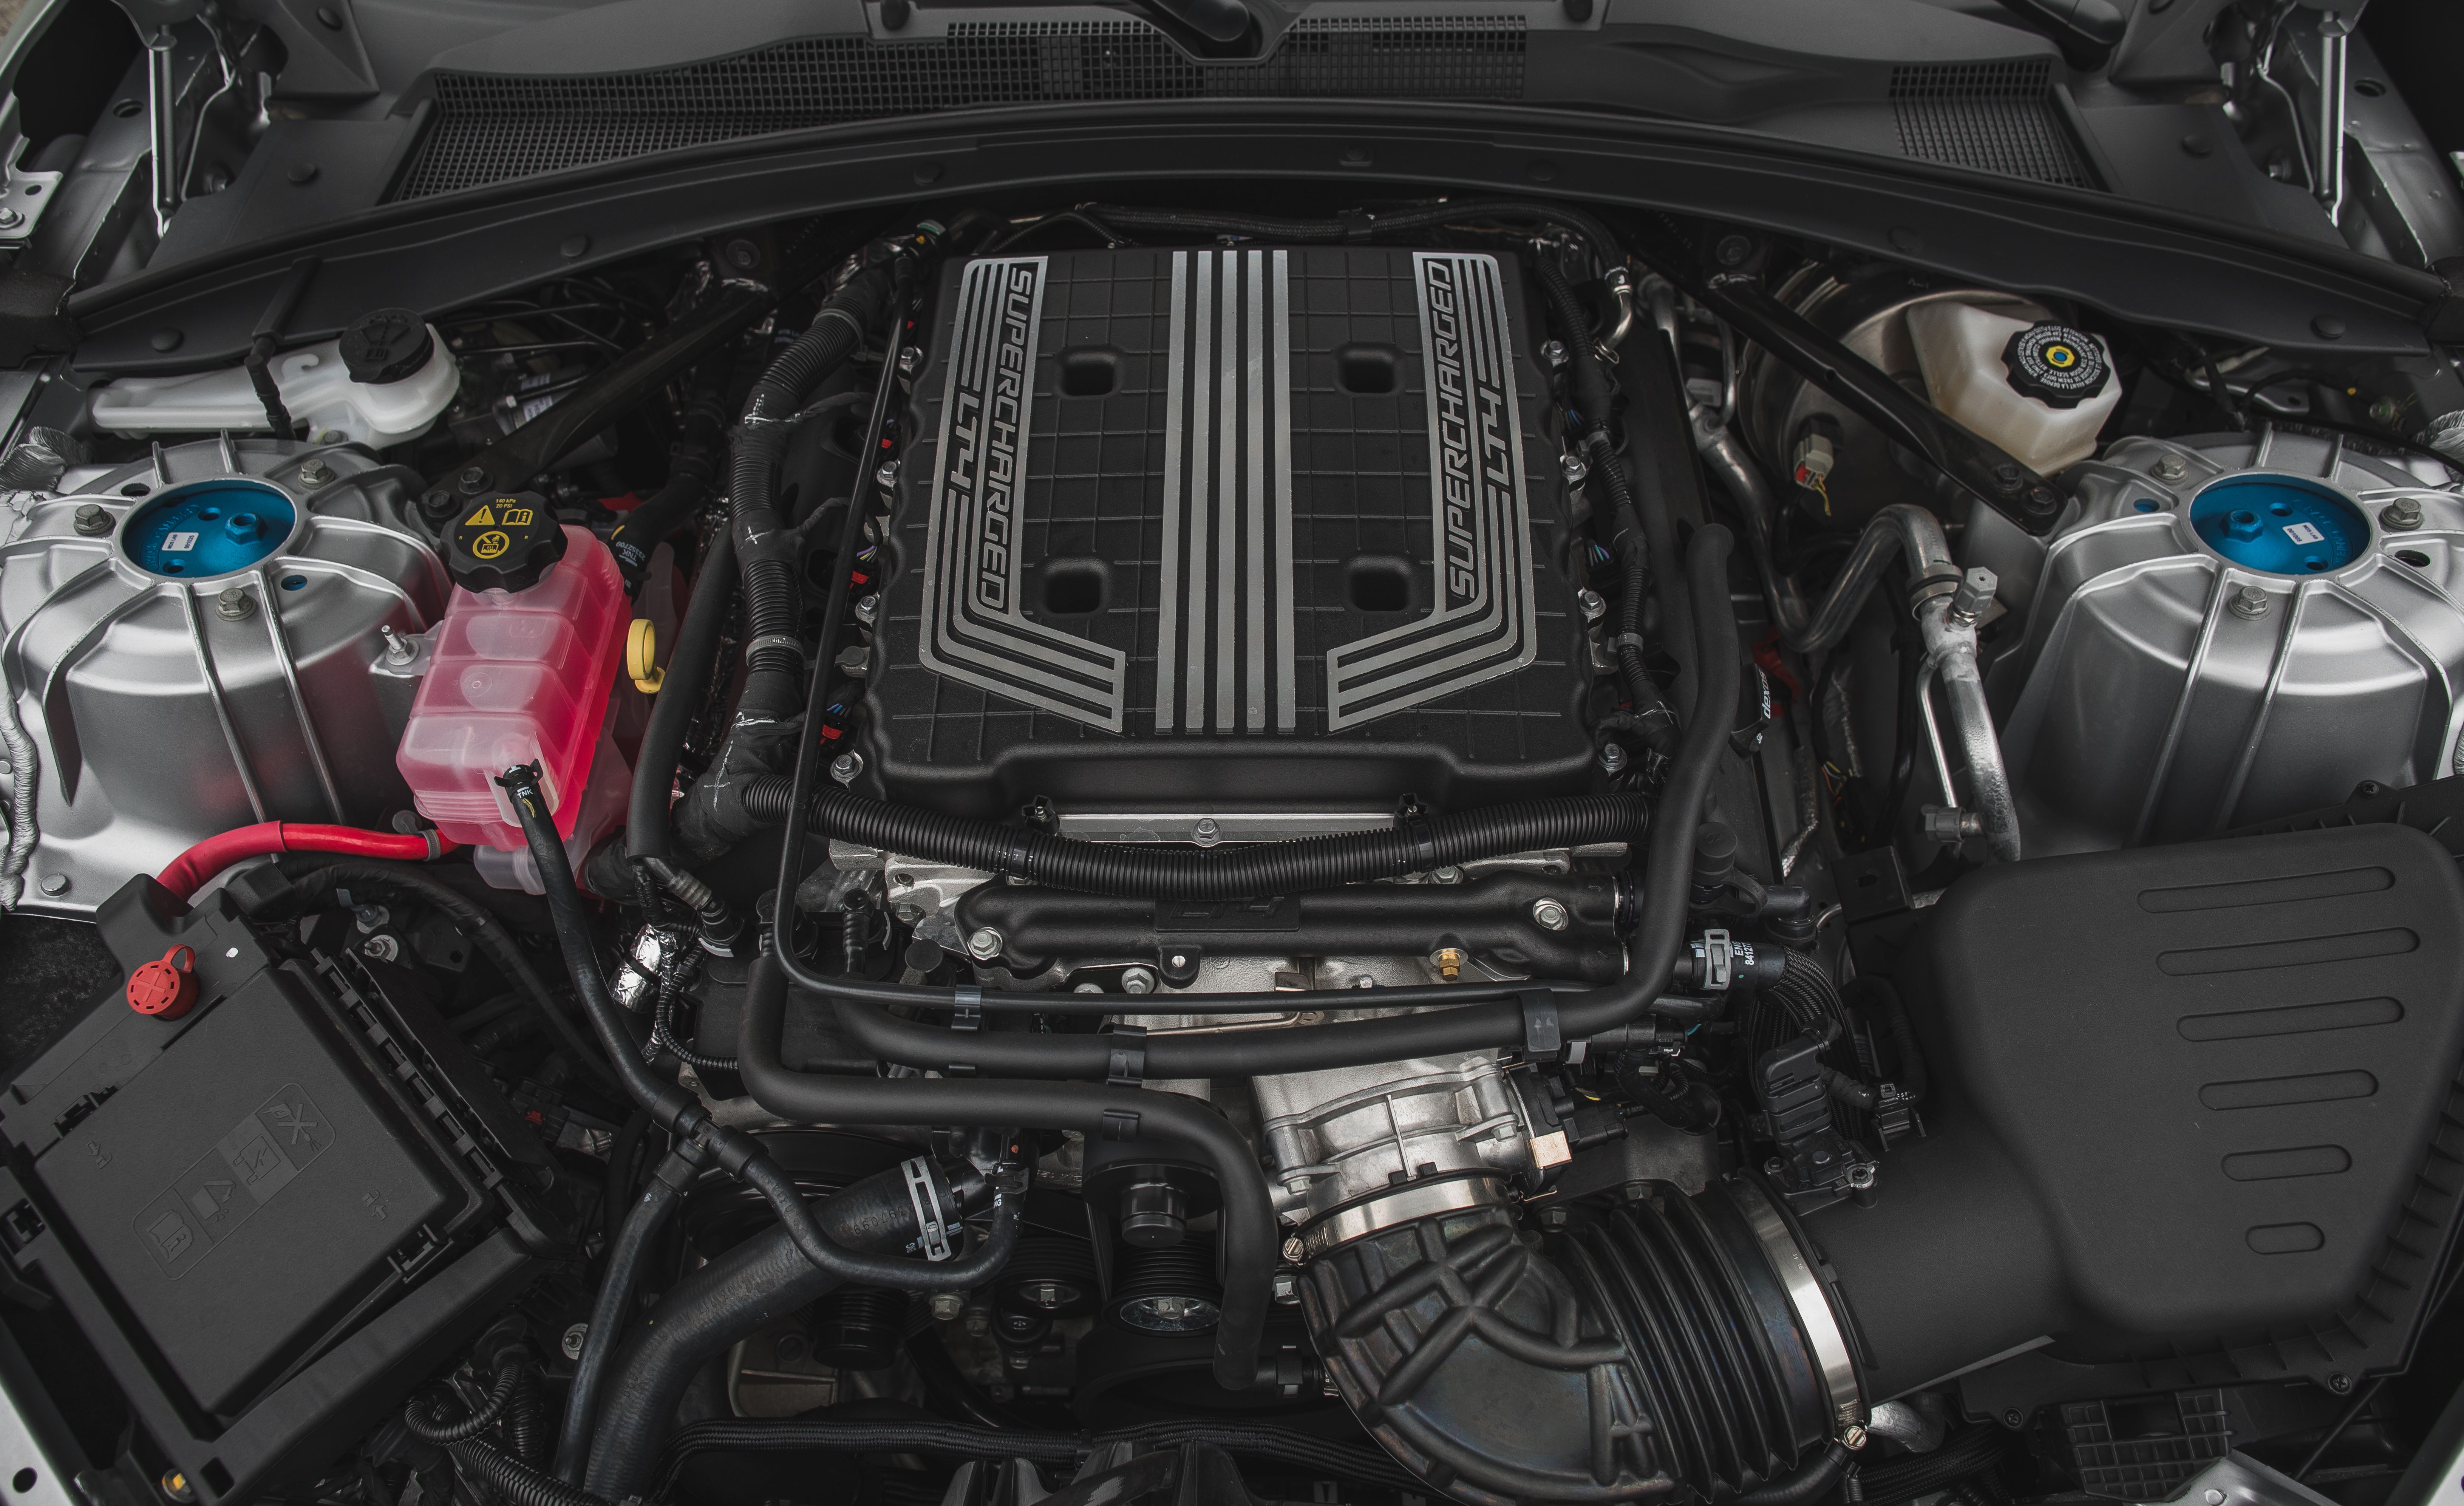 What Sets The Chevrolet Camaro Zl1 1le Apart From The Zl1